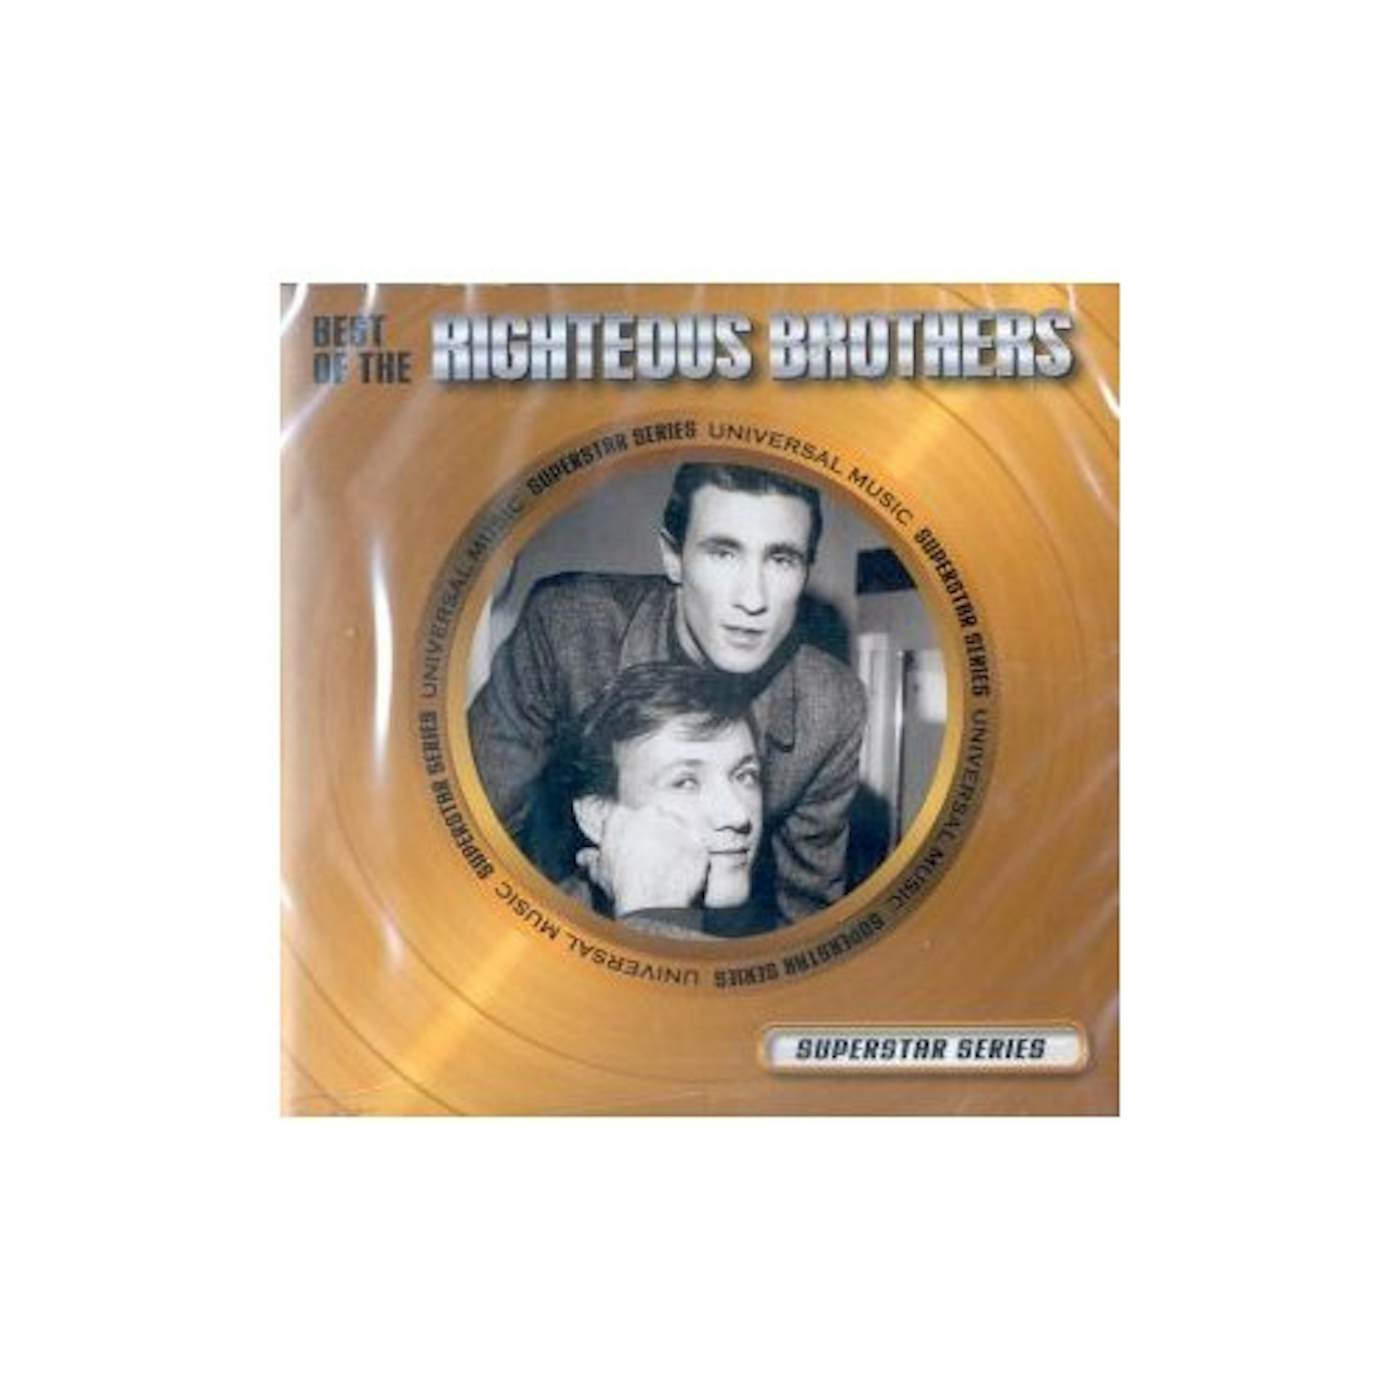 The Righteous Brothers BEST OF-SUPERSTAR SERIES CD